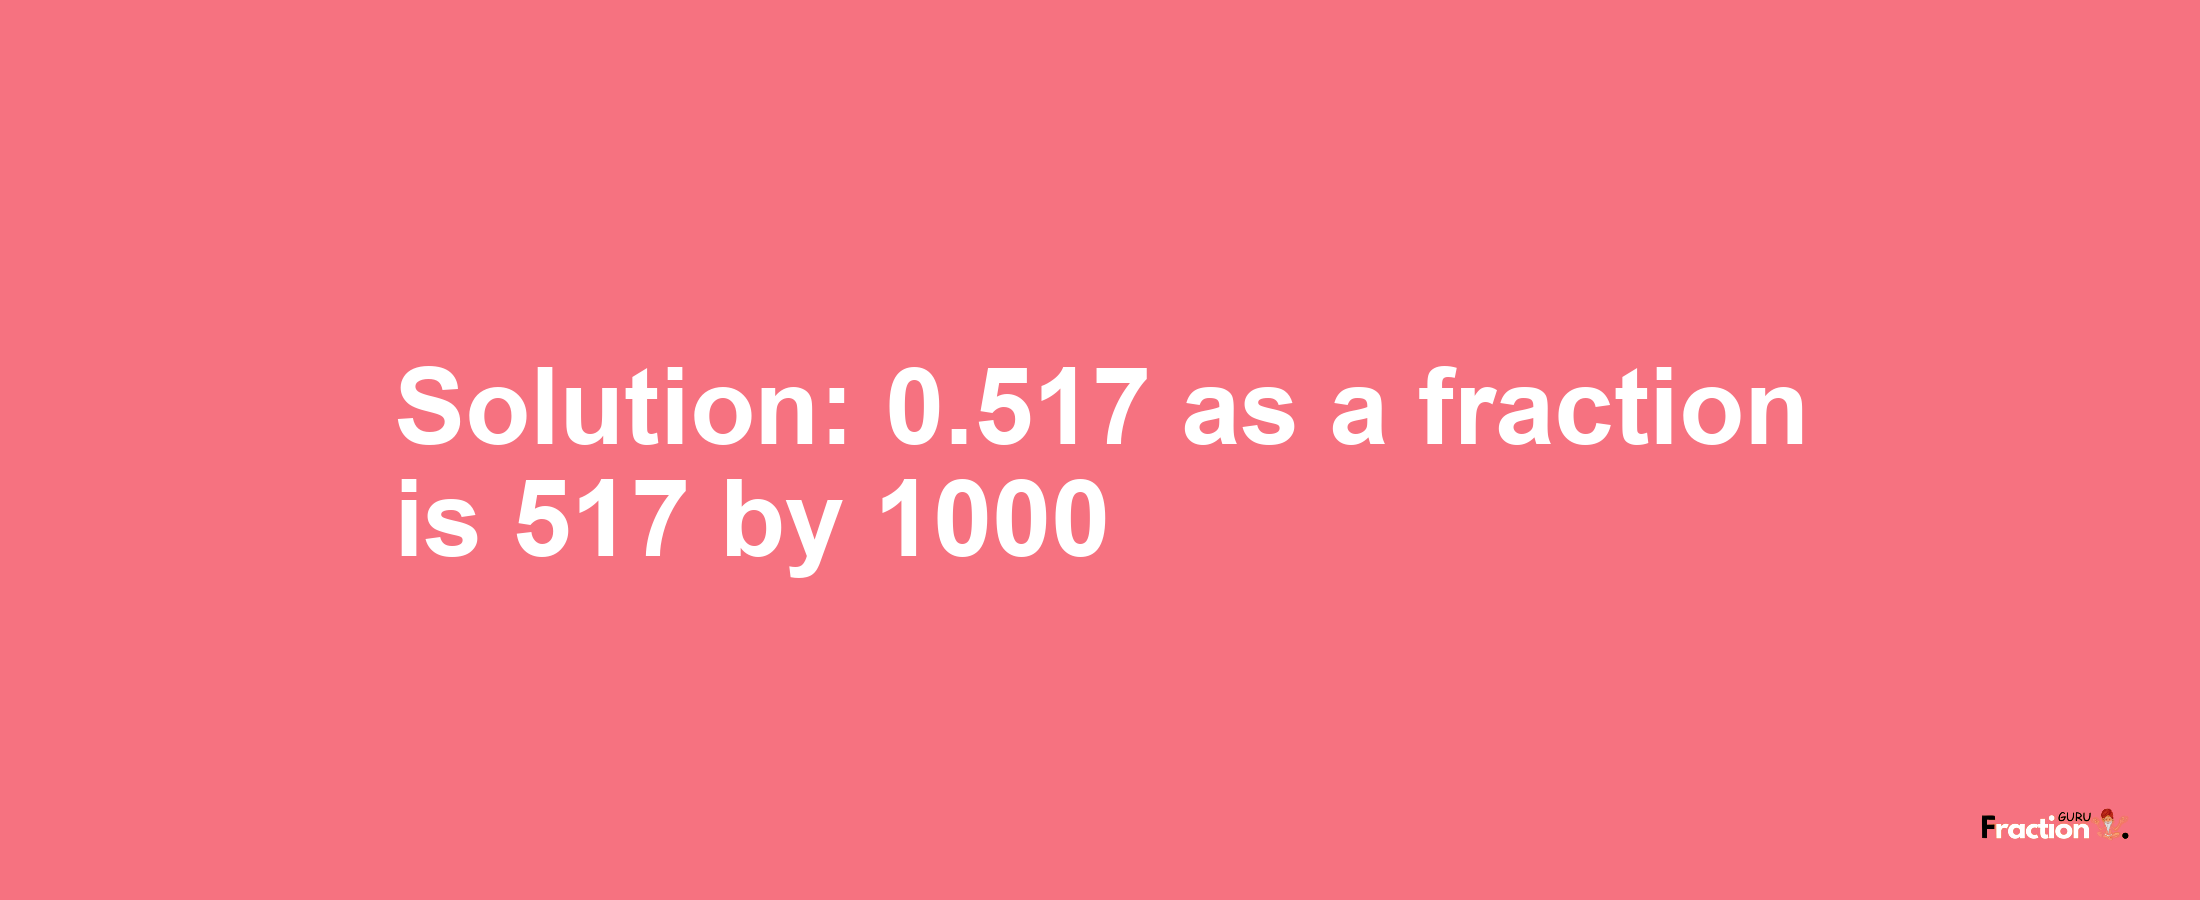 Solution:0.517 as a fraction is 517/1000